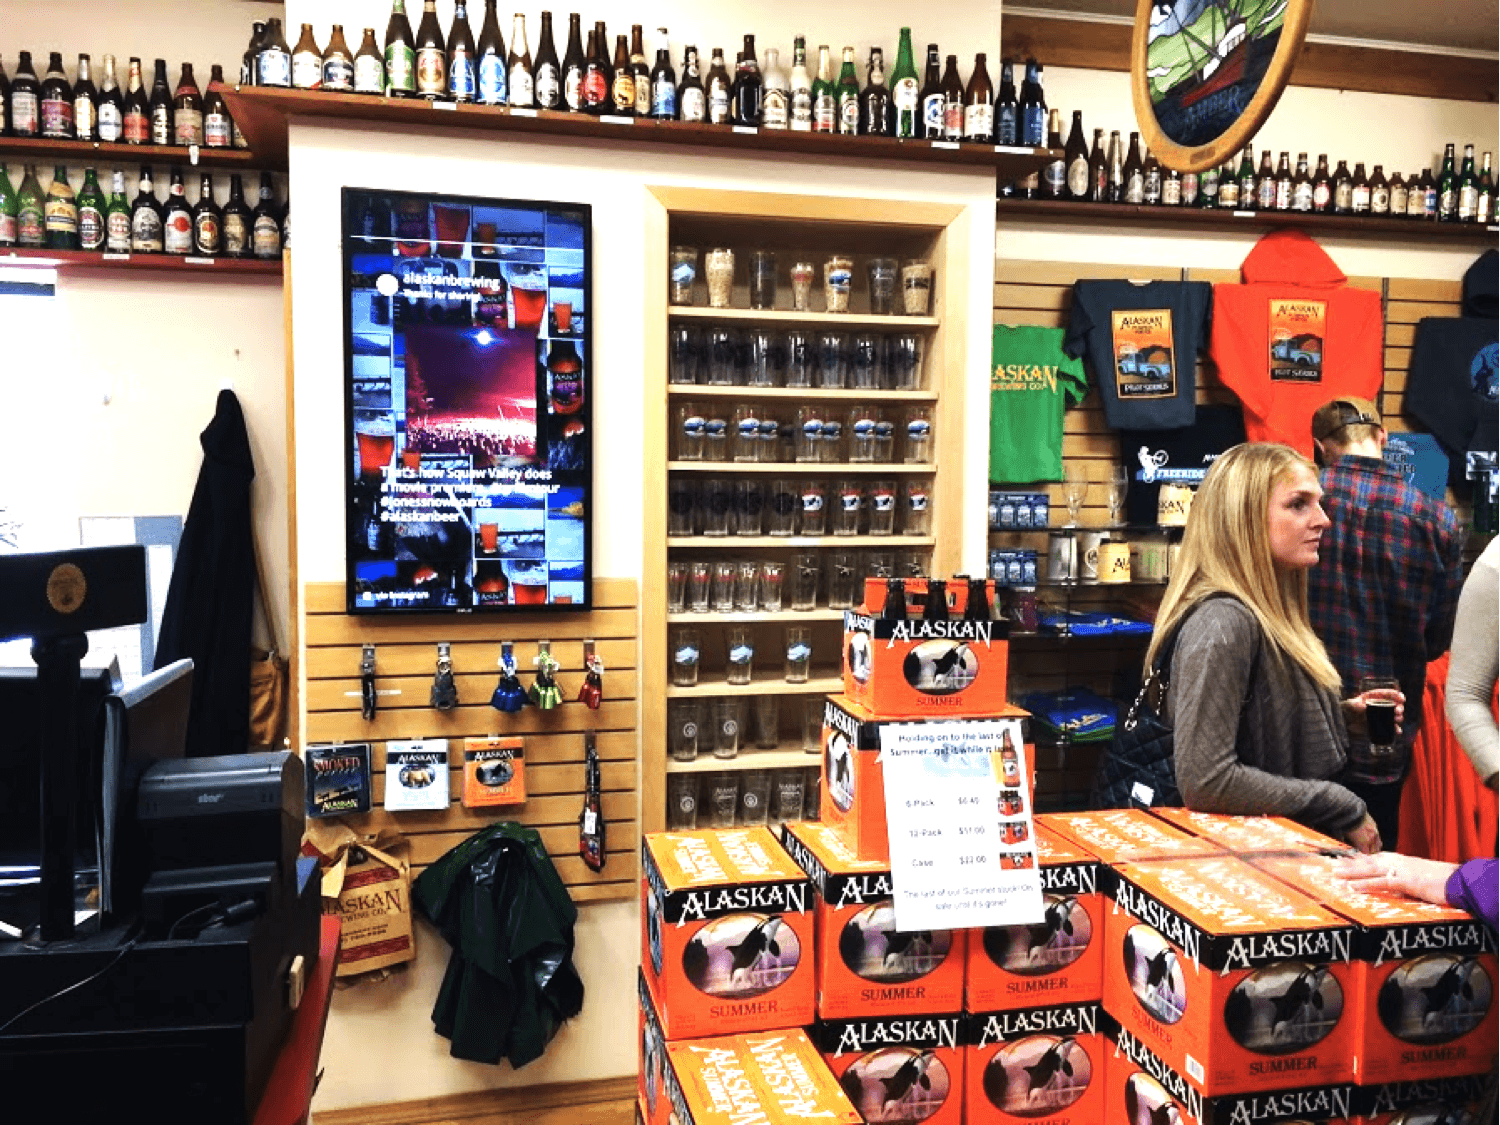 Alaska Brewing features an Enplug-powered digital display where customers are waiting in line.